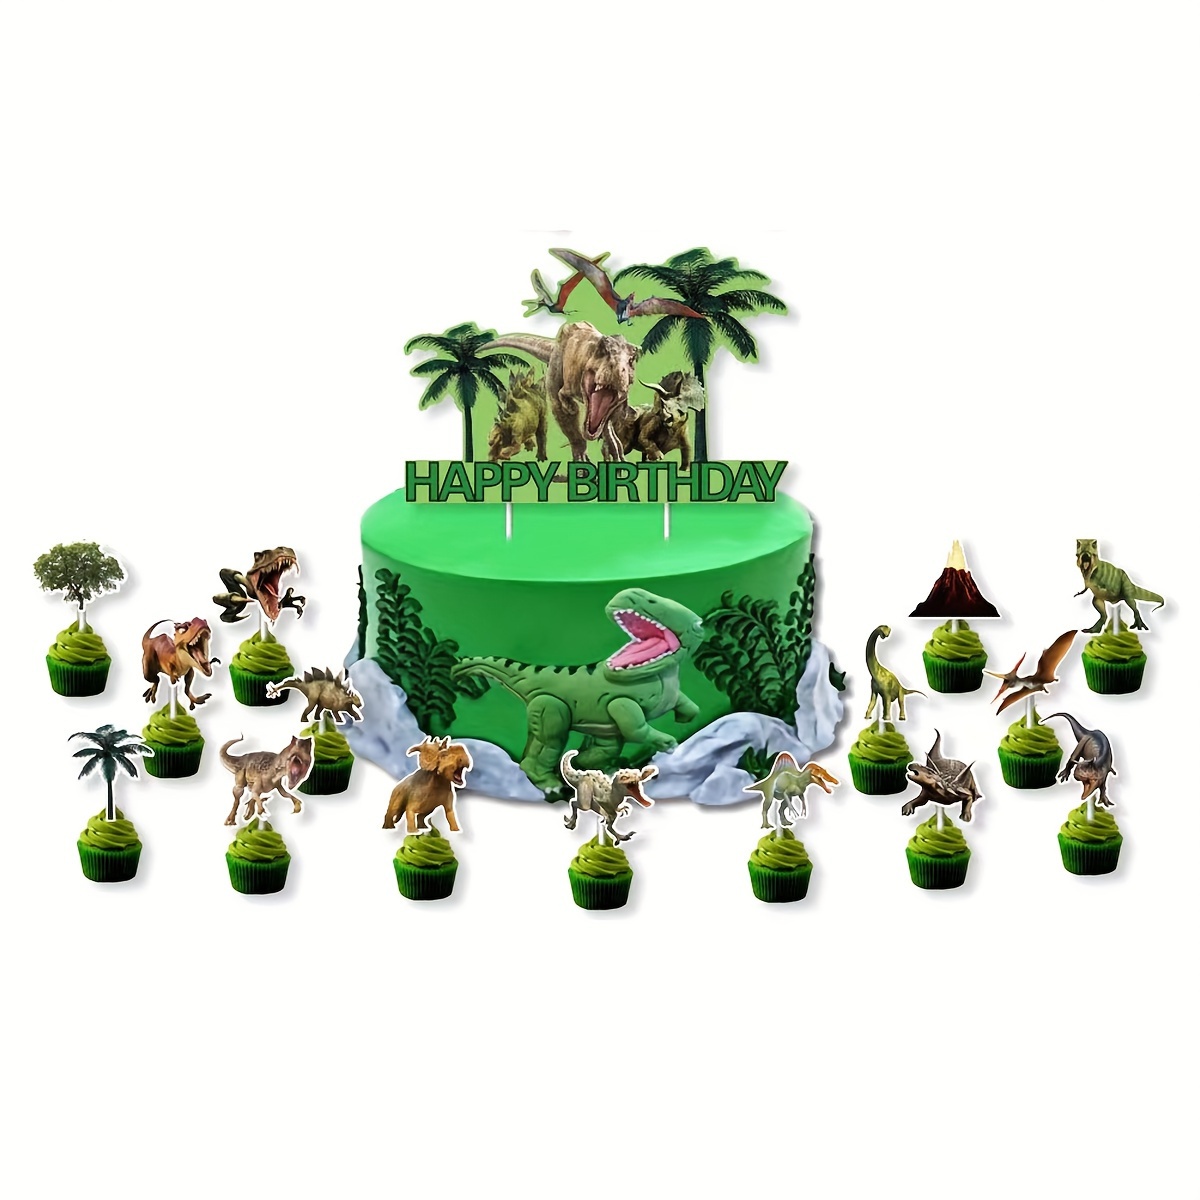 Dinosaur Fondant Silicone Chocolate Molds (6Pcs), Kid's Cartoon Dino Claws  Clay Molds for Dinosaur Theme Party Cake Decoration Cupcake Topper Sugar